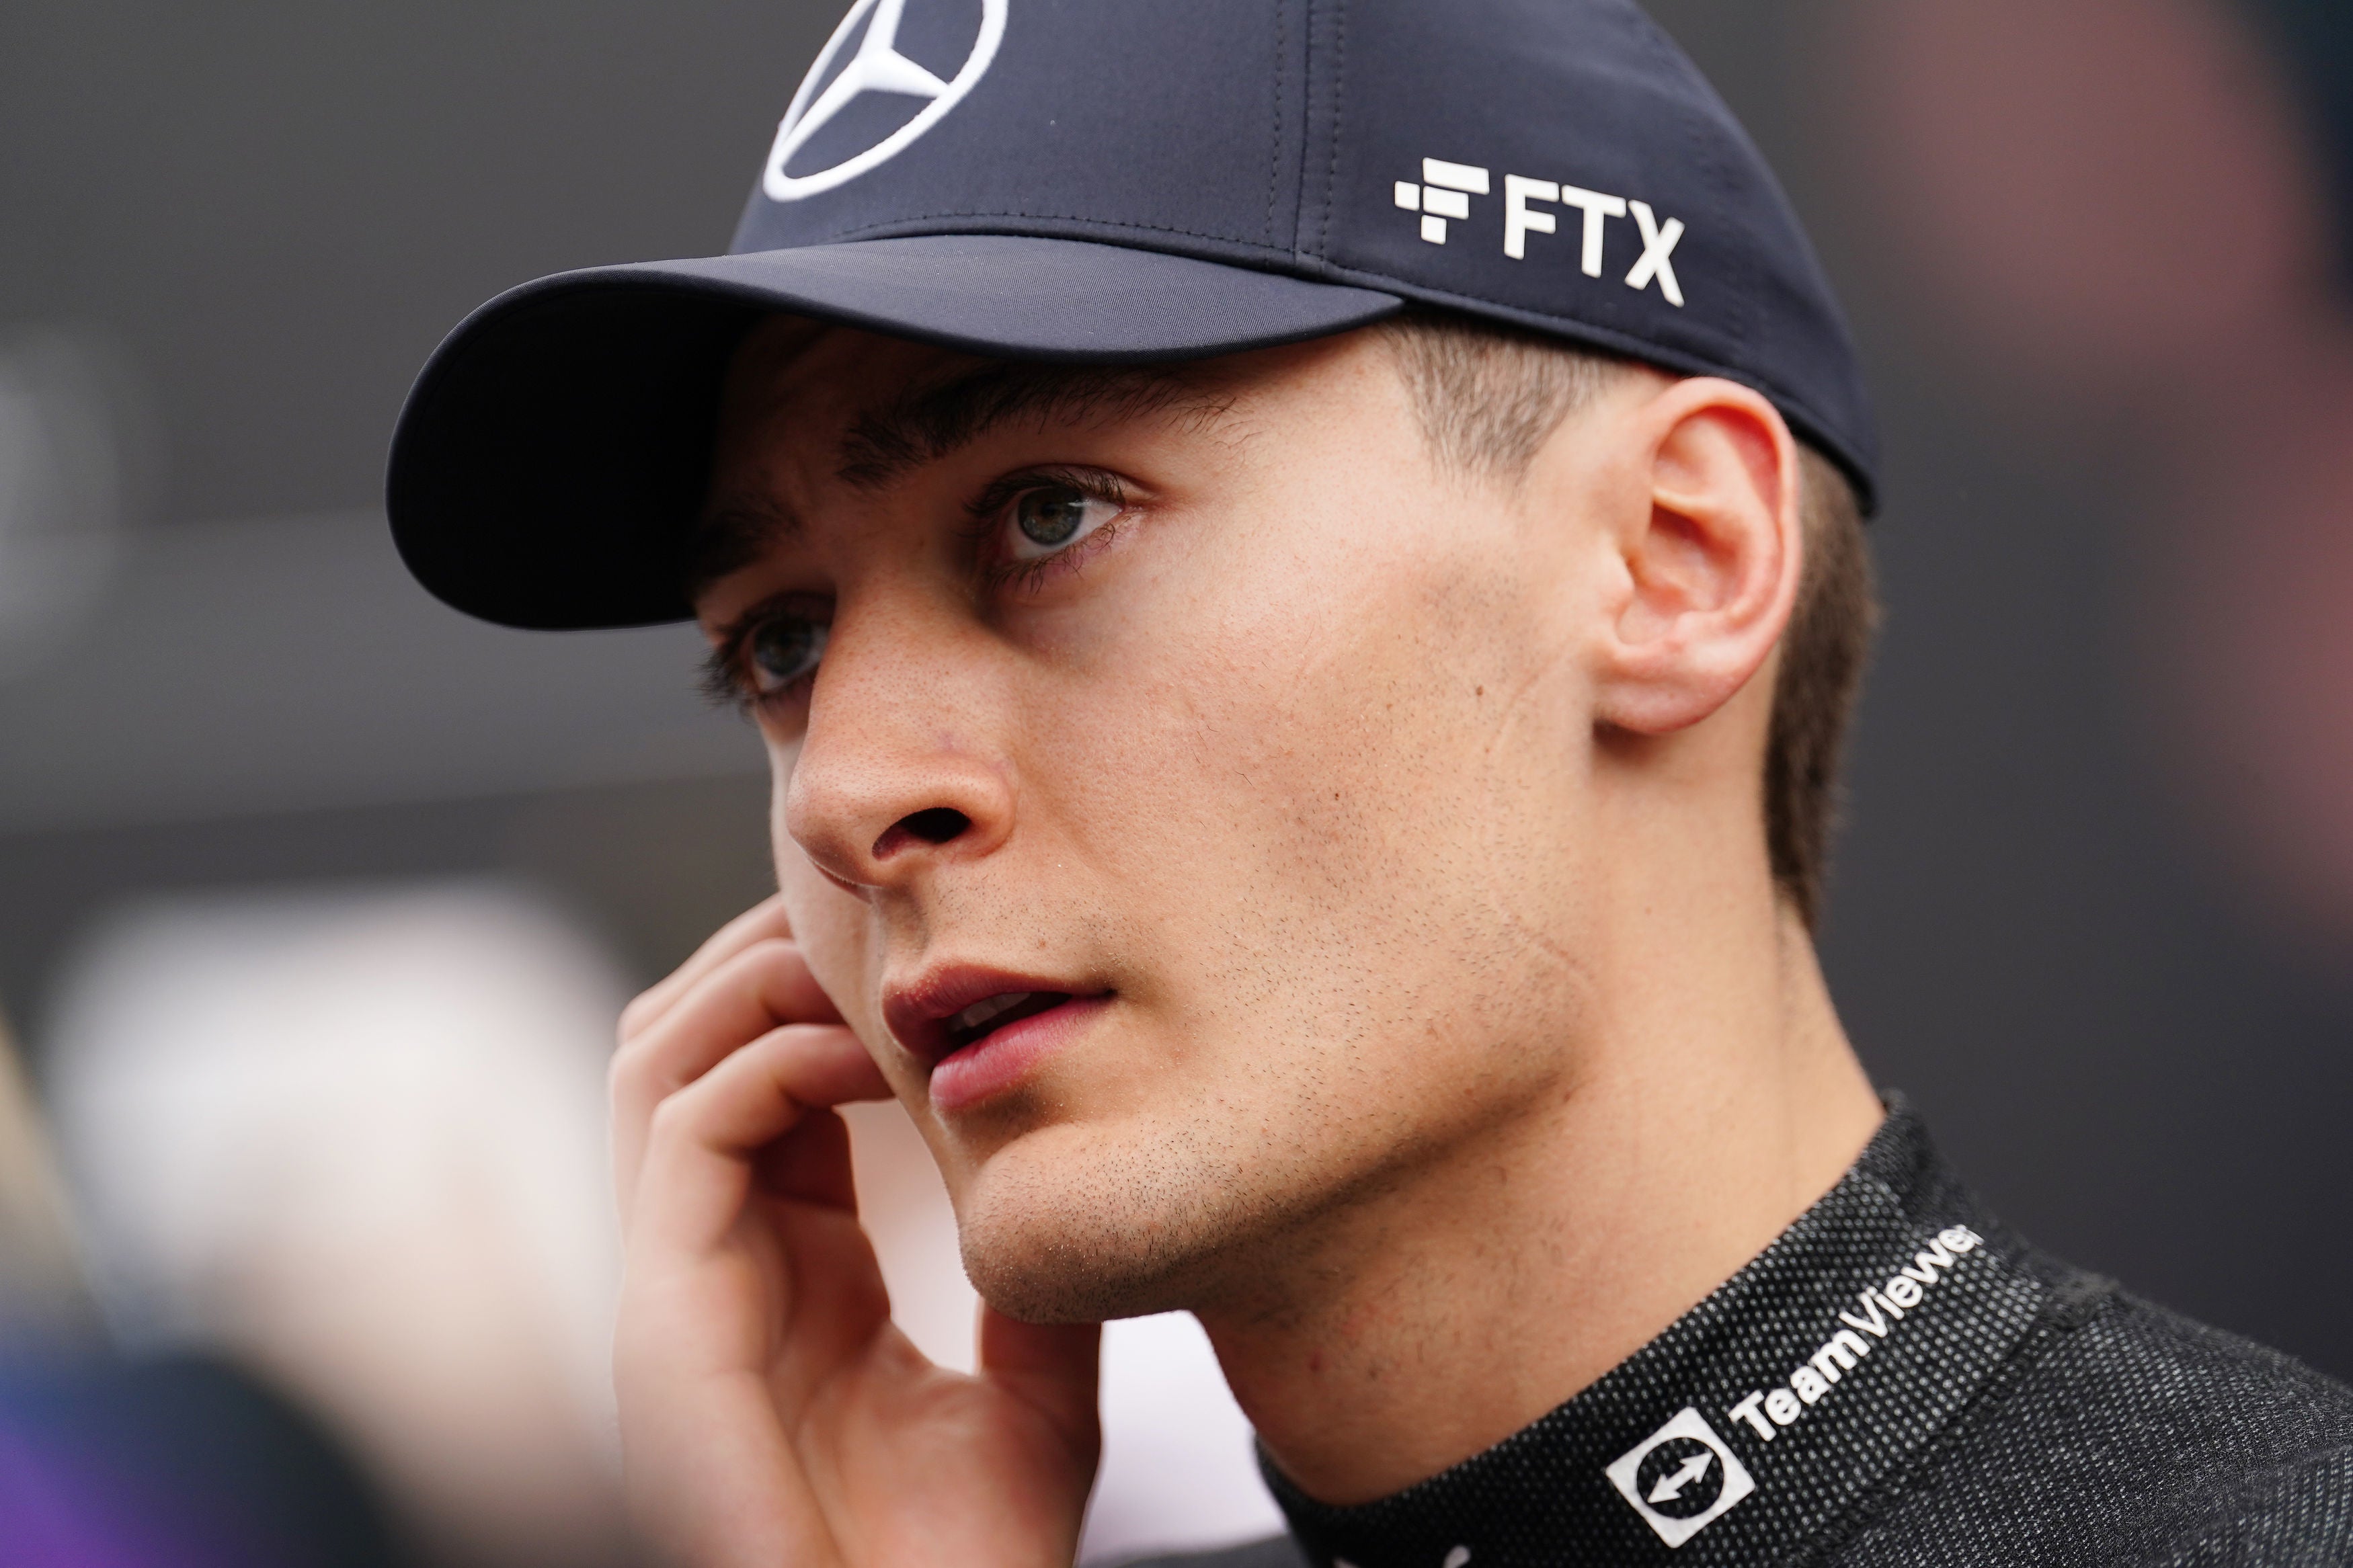 George Russell is out-performing Lewis Hamilton this season